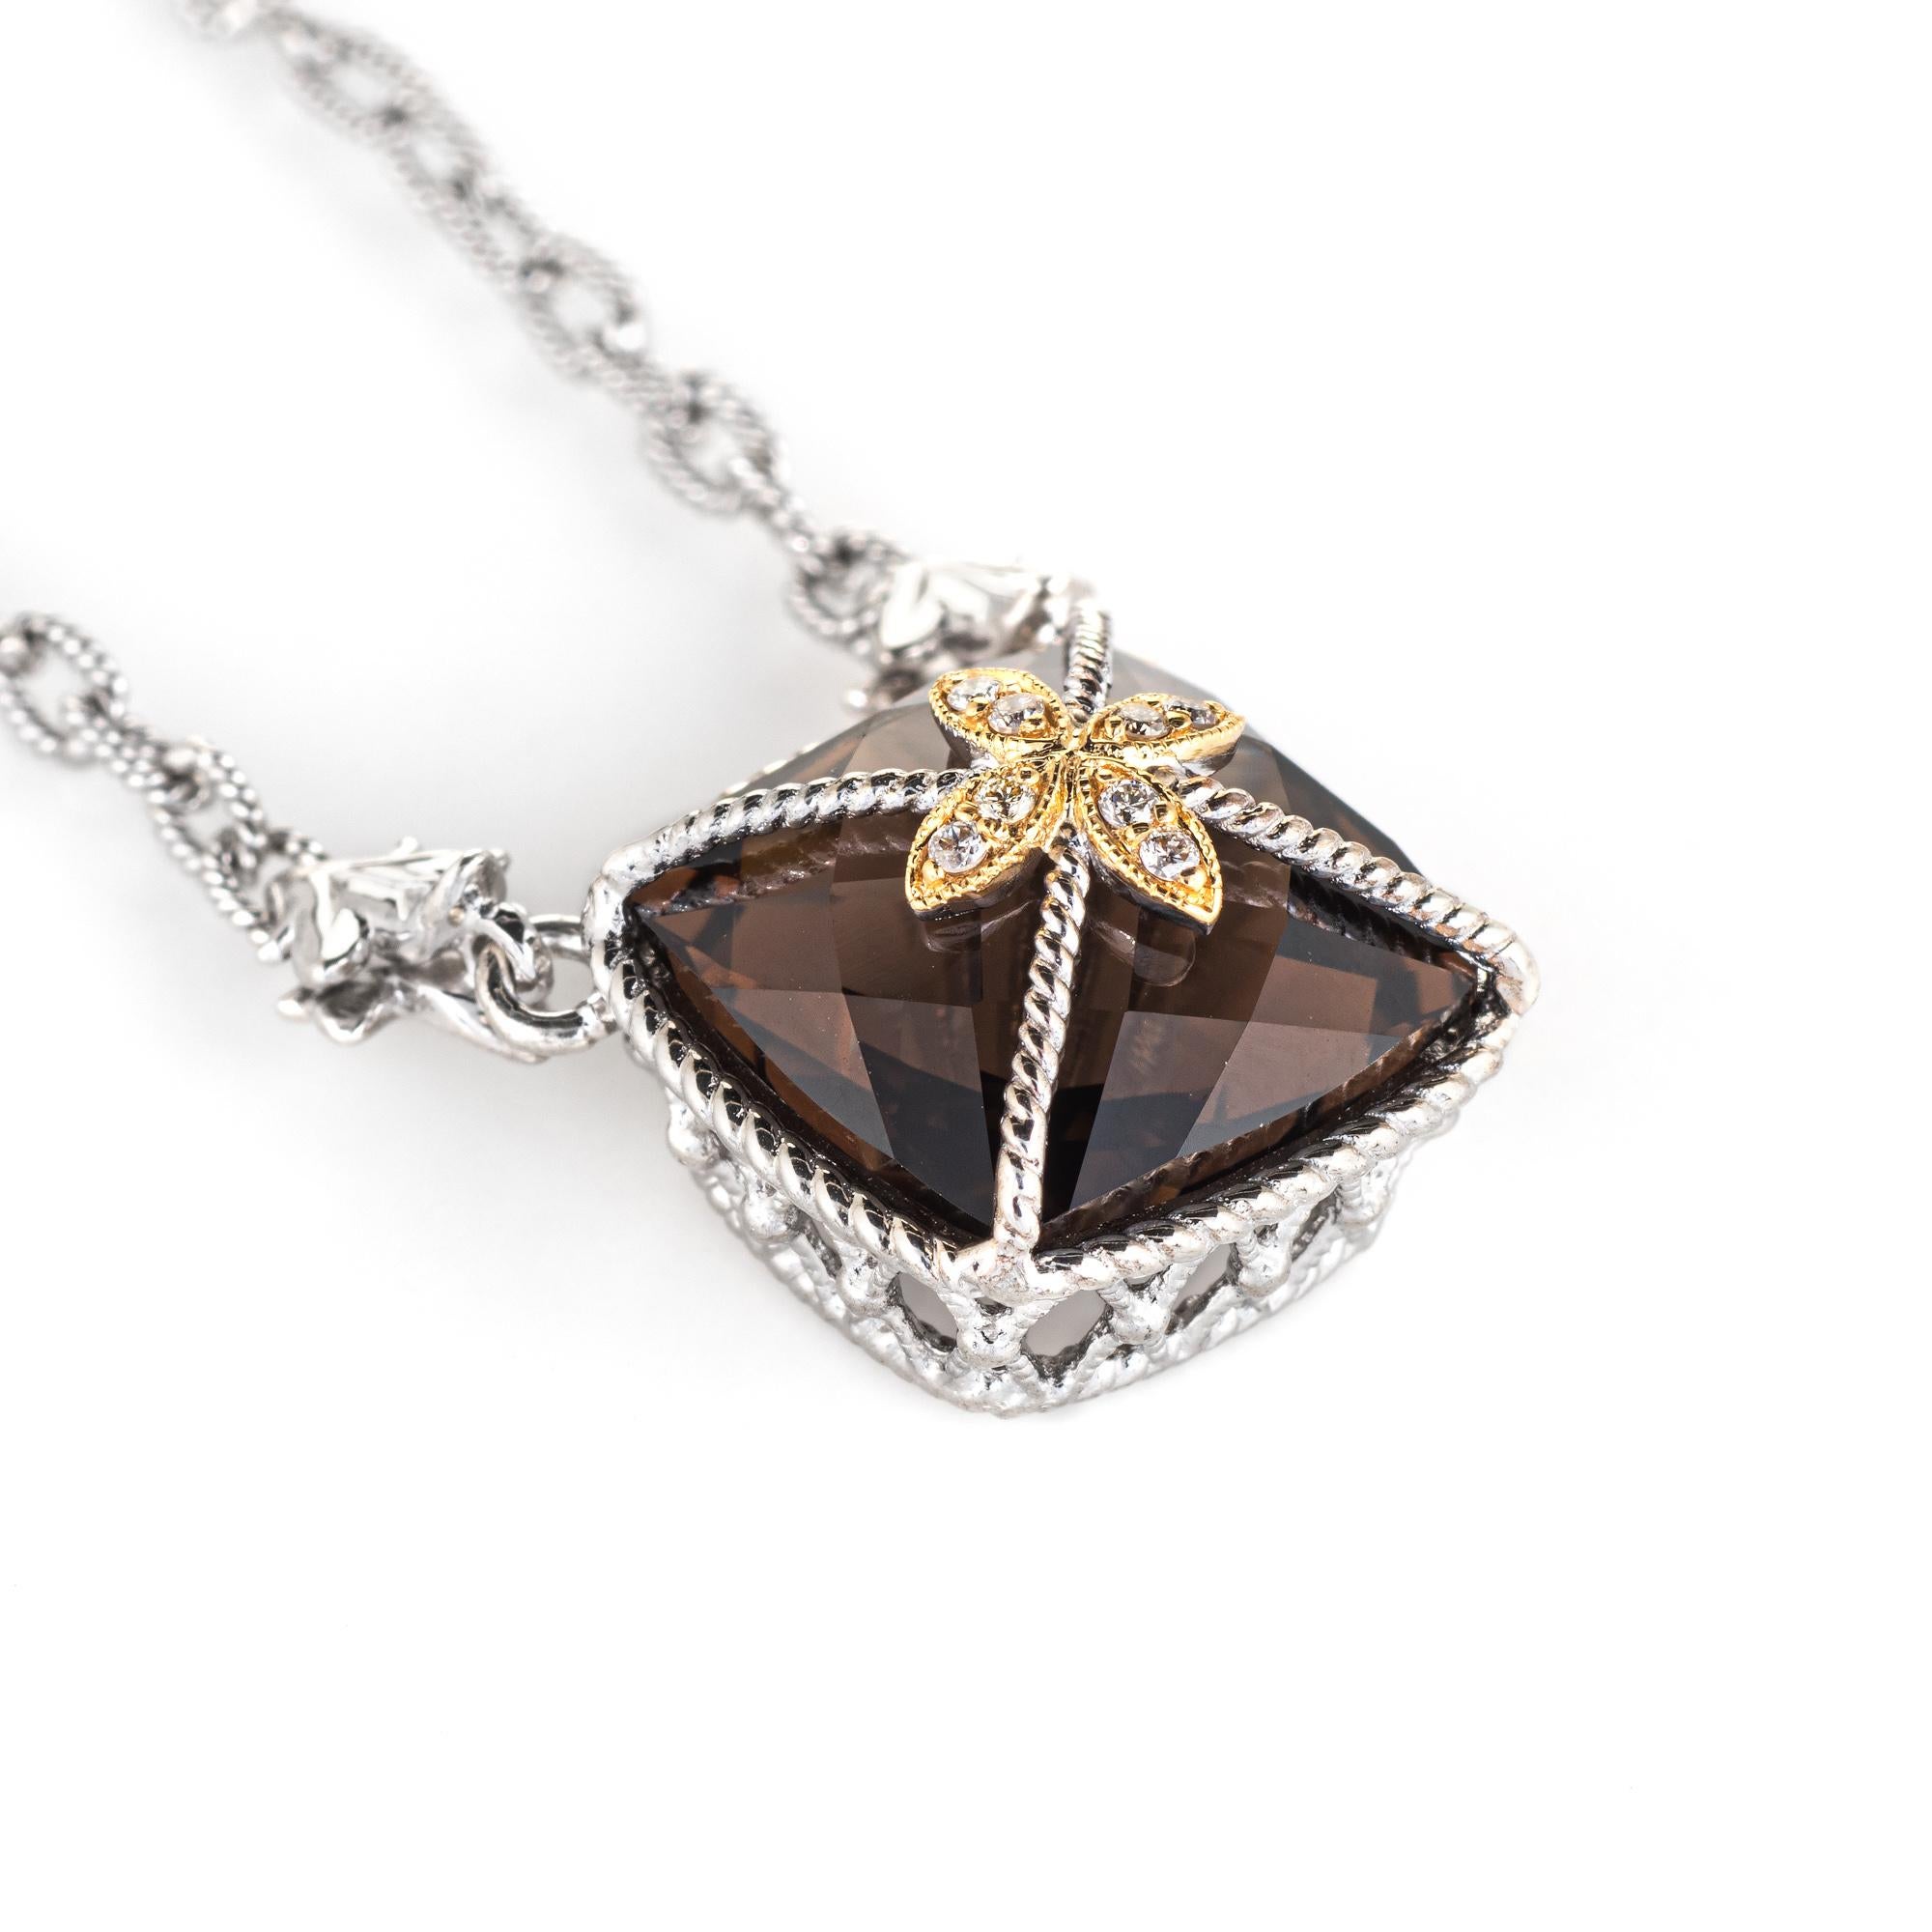 Finely detailed pre owned Gabriel & Co necklace crafted in 18 karat white gold and sterling silver. 

Smoky quartz measures 13mm accented with an estimated 0.04 carats of diamonds (estimated at H-I color and SI1-2 clarity). The quartz is in